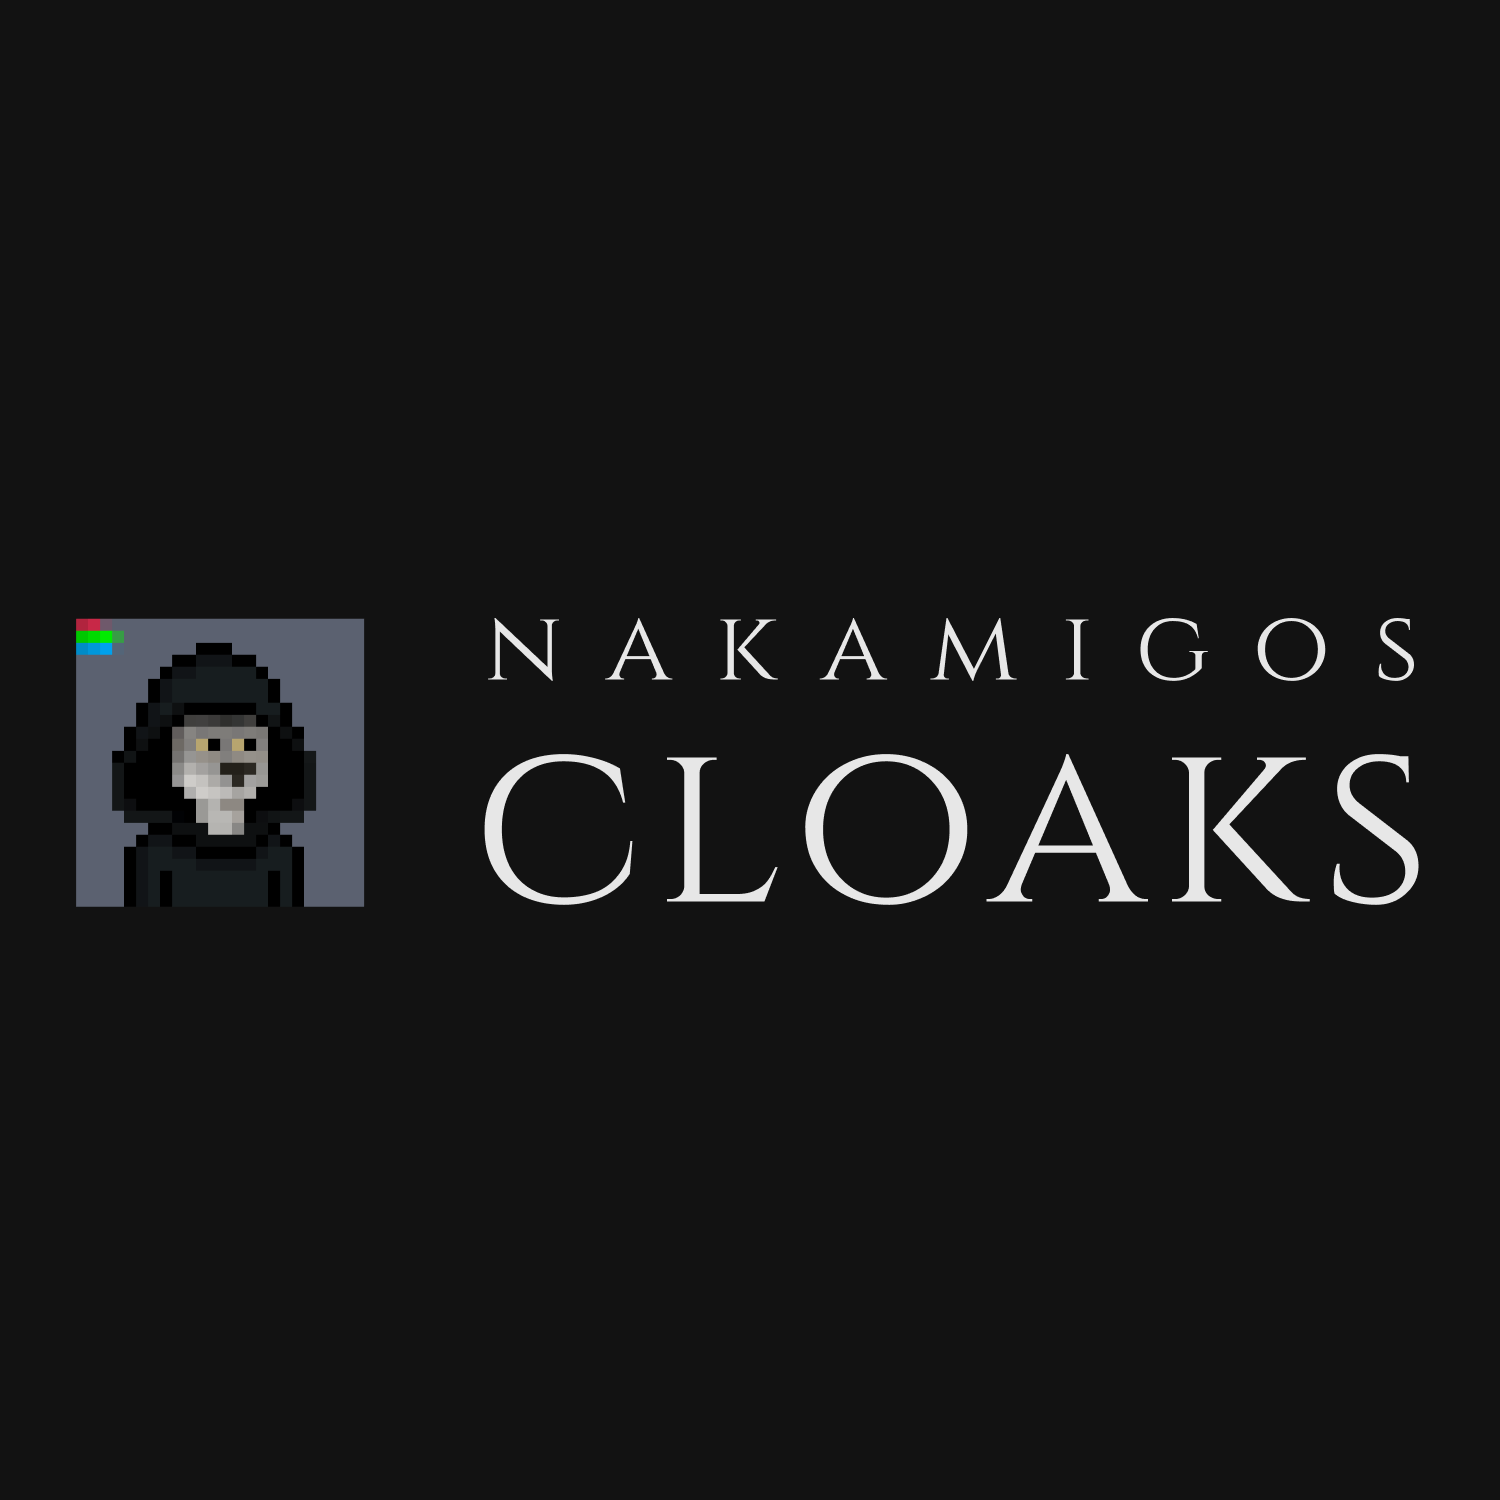 Nakamigos Revisited